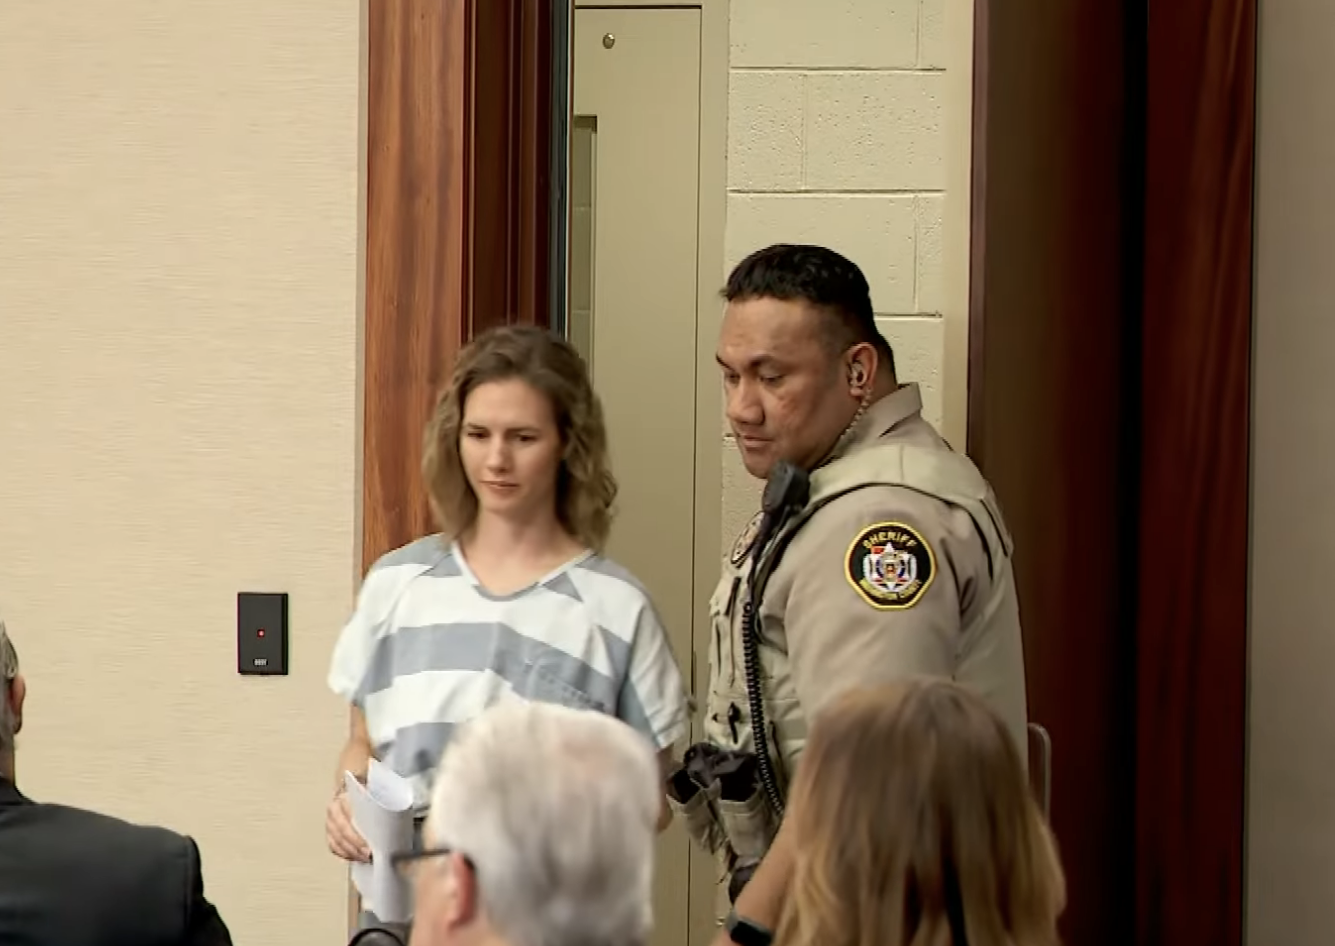 Ruby Franke with a deputy in a courtroom setting